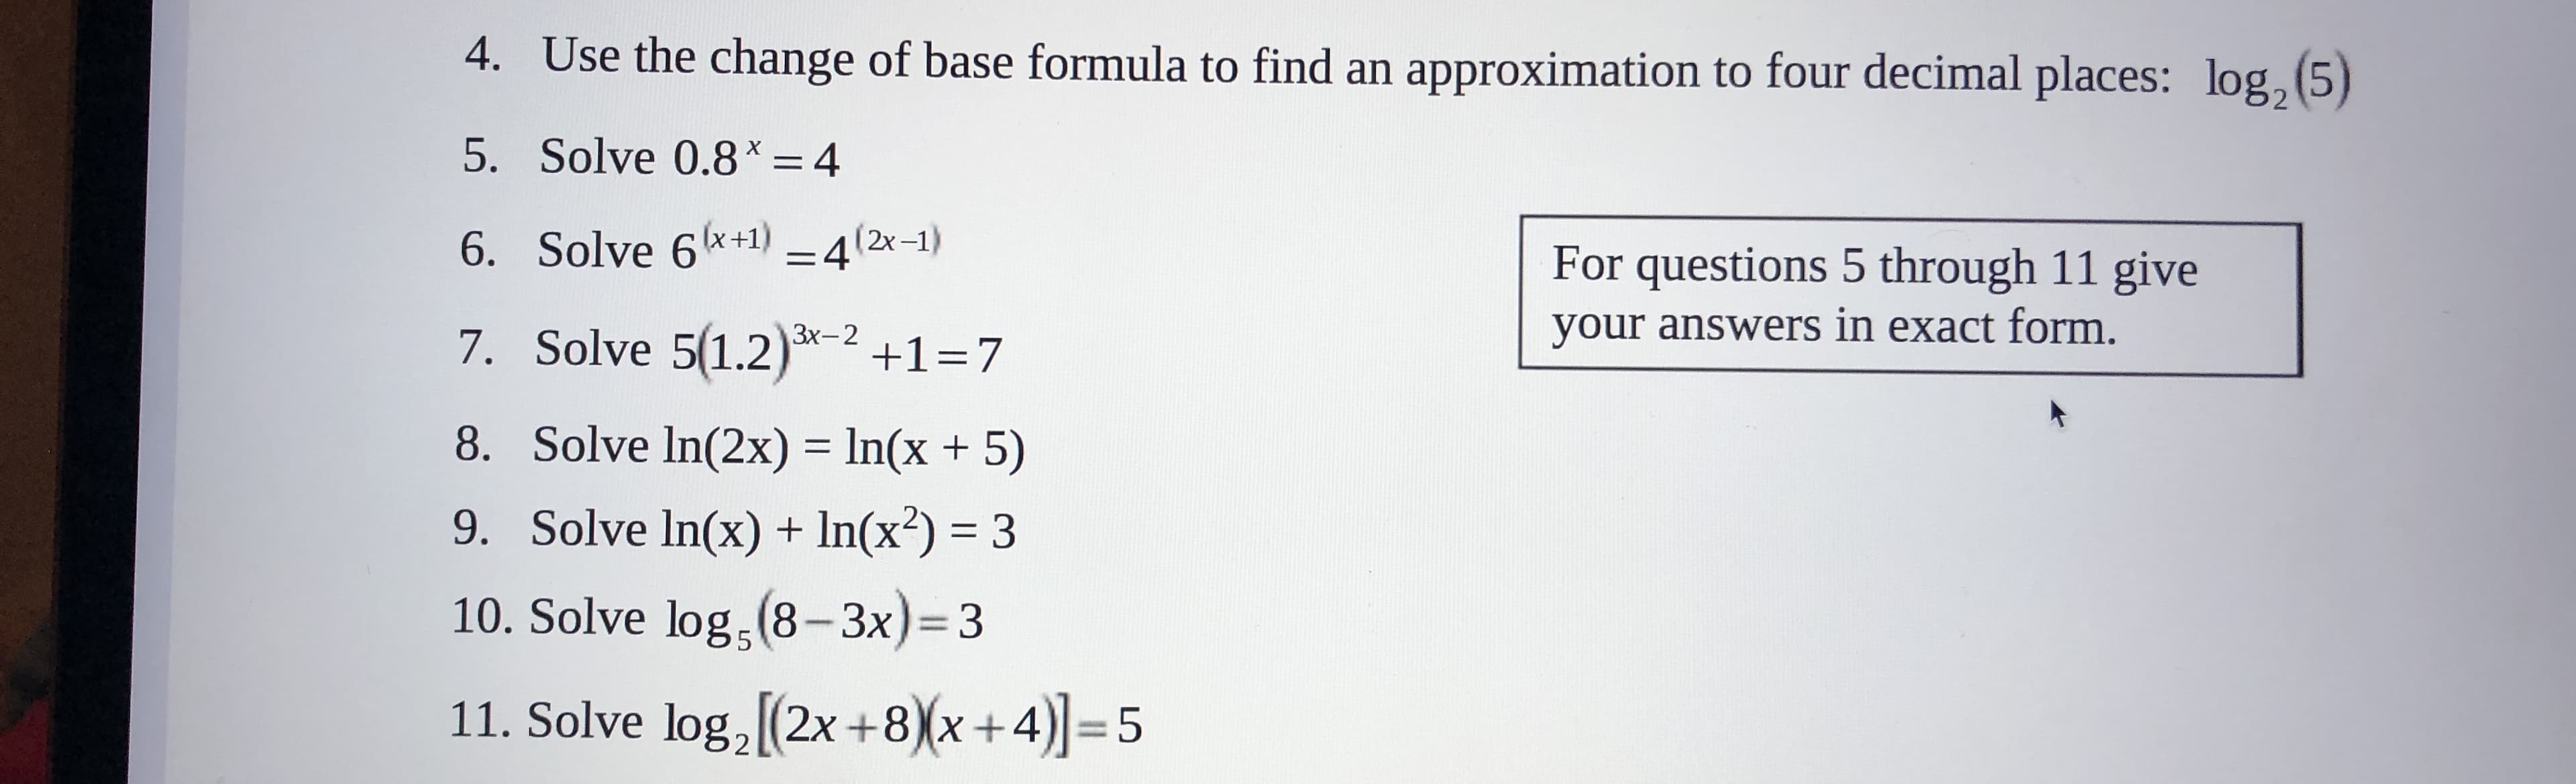 4. Use the change of base formula to find an approximation to four decimal places: log, (5)
5. Solve 0.8* = 4
6. Solve 6*+1) – 4(2x-1)
For questions 5 through 11 give
your answers in exact form.
7. Solve 5(1.2)*-2 +1=7
8. Solve In(2x) = In(x + 5)
9. Solve In(x) + In(x²) = 3
10. Solve log (8-3x)=3
11. Solve log,(2x+8)(x+4)=5
